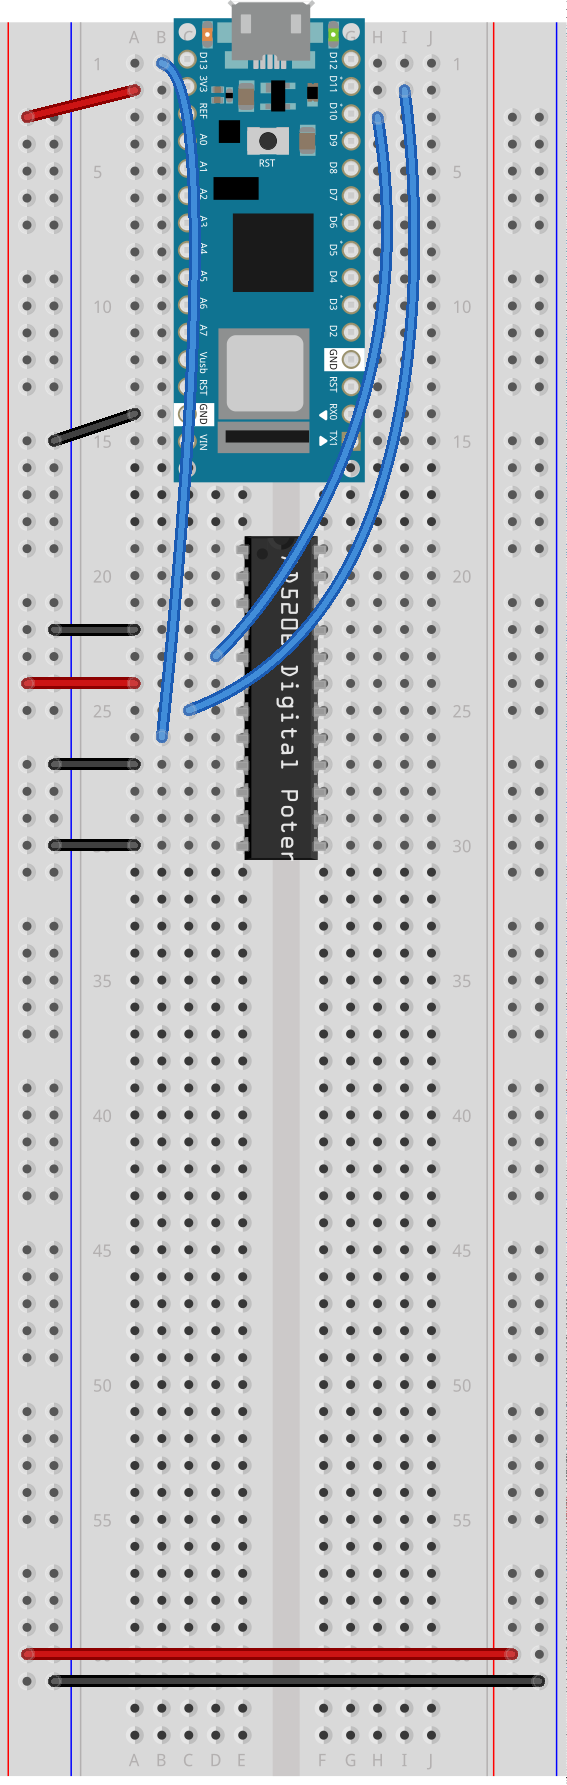 Figure 10. Schematic of an Arduino attached to a AD5206 Potentiometer. The Arduino's ground is attached the the potentiometer's A5, Vss, and Ground pins, numbered 12, 9, and 4, respectively. The Arduino's D10, D11, and D13 pins are attached to the potentiometer's CS, SDI, and CLK pins, which are numbered 5, 7, and 8, respectively. The potentiometer's Vdd pin, number 6, is connected to 3.3 volts.